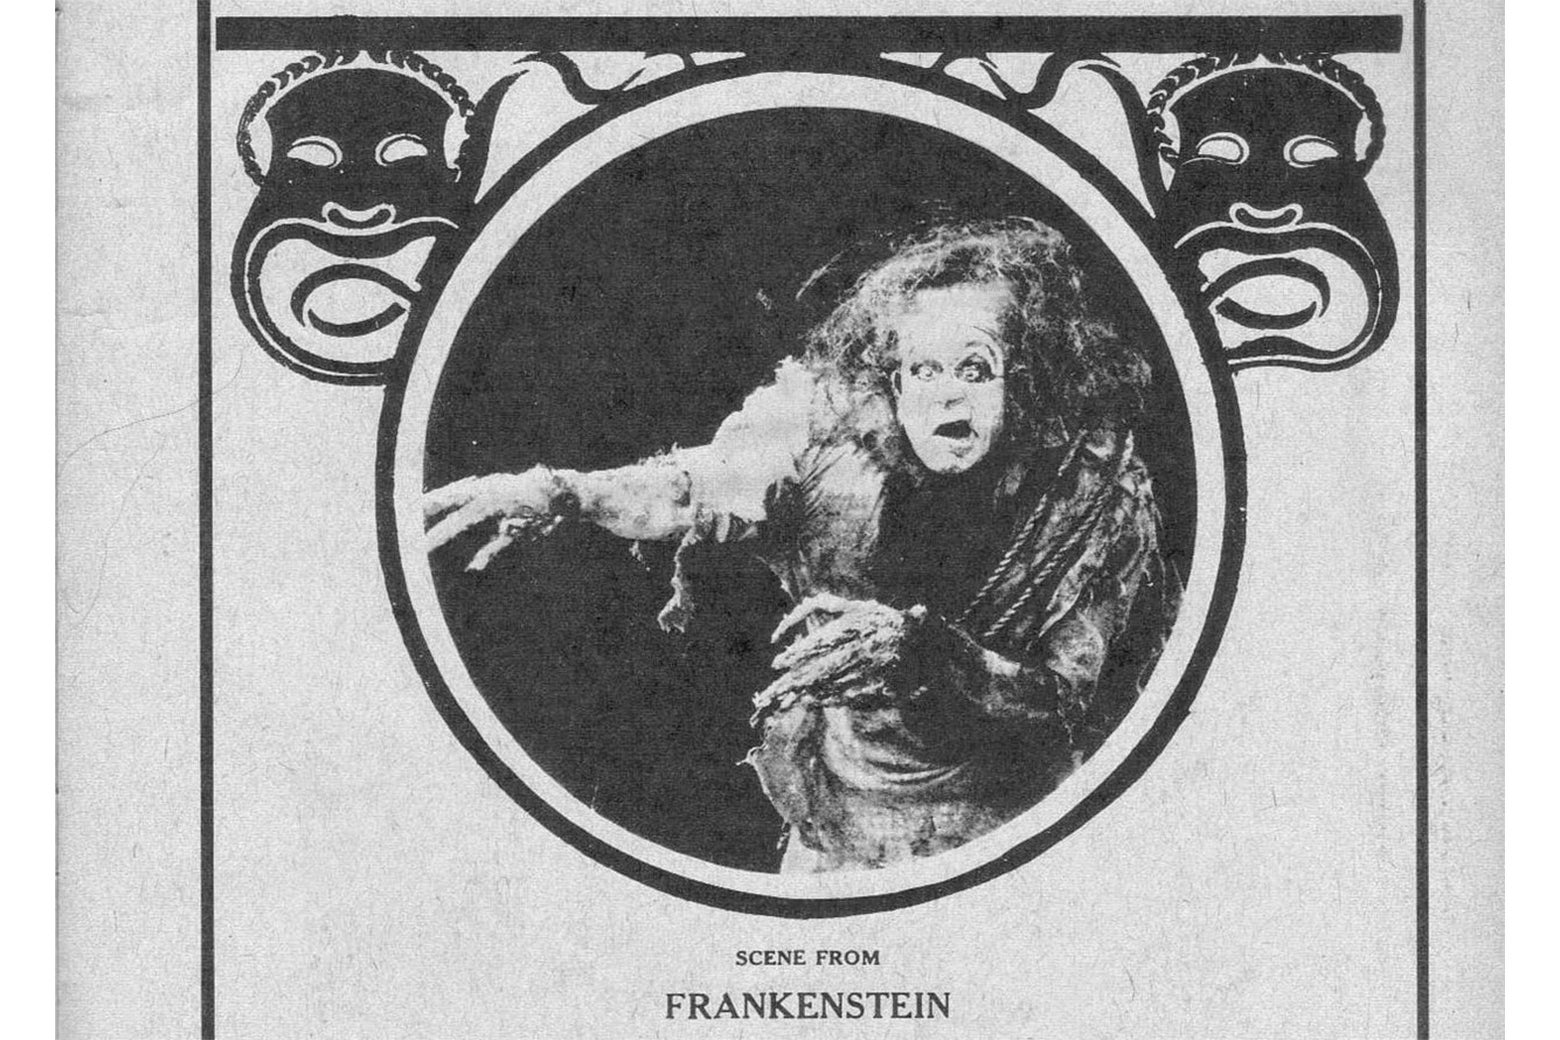 Frankenstein's monster glares out from a magazine cover.